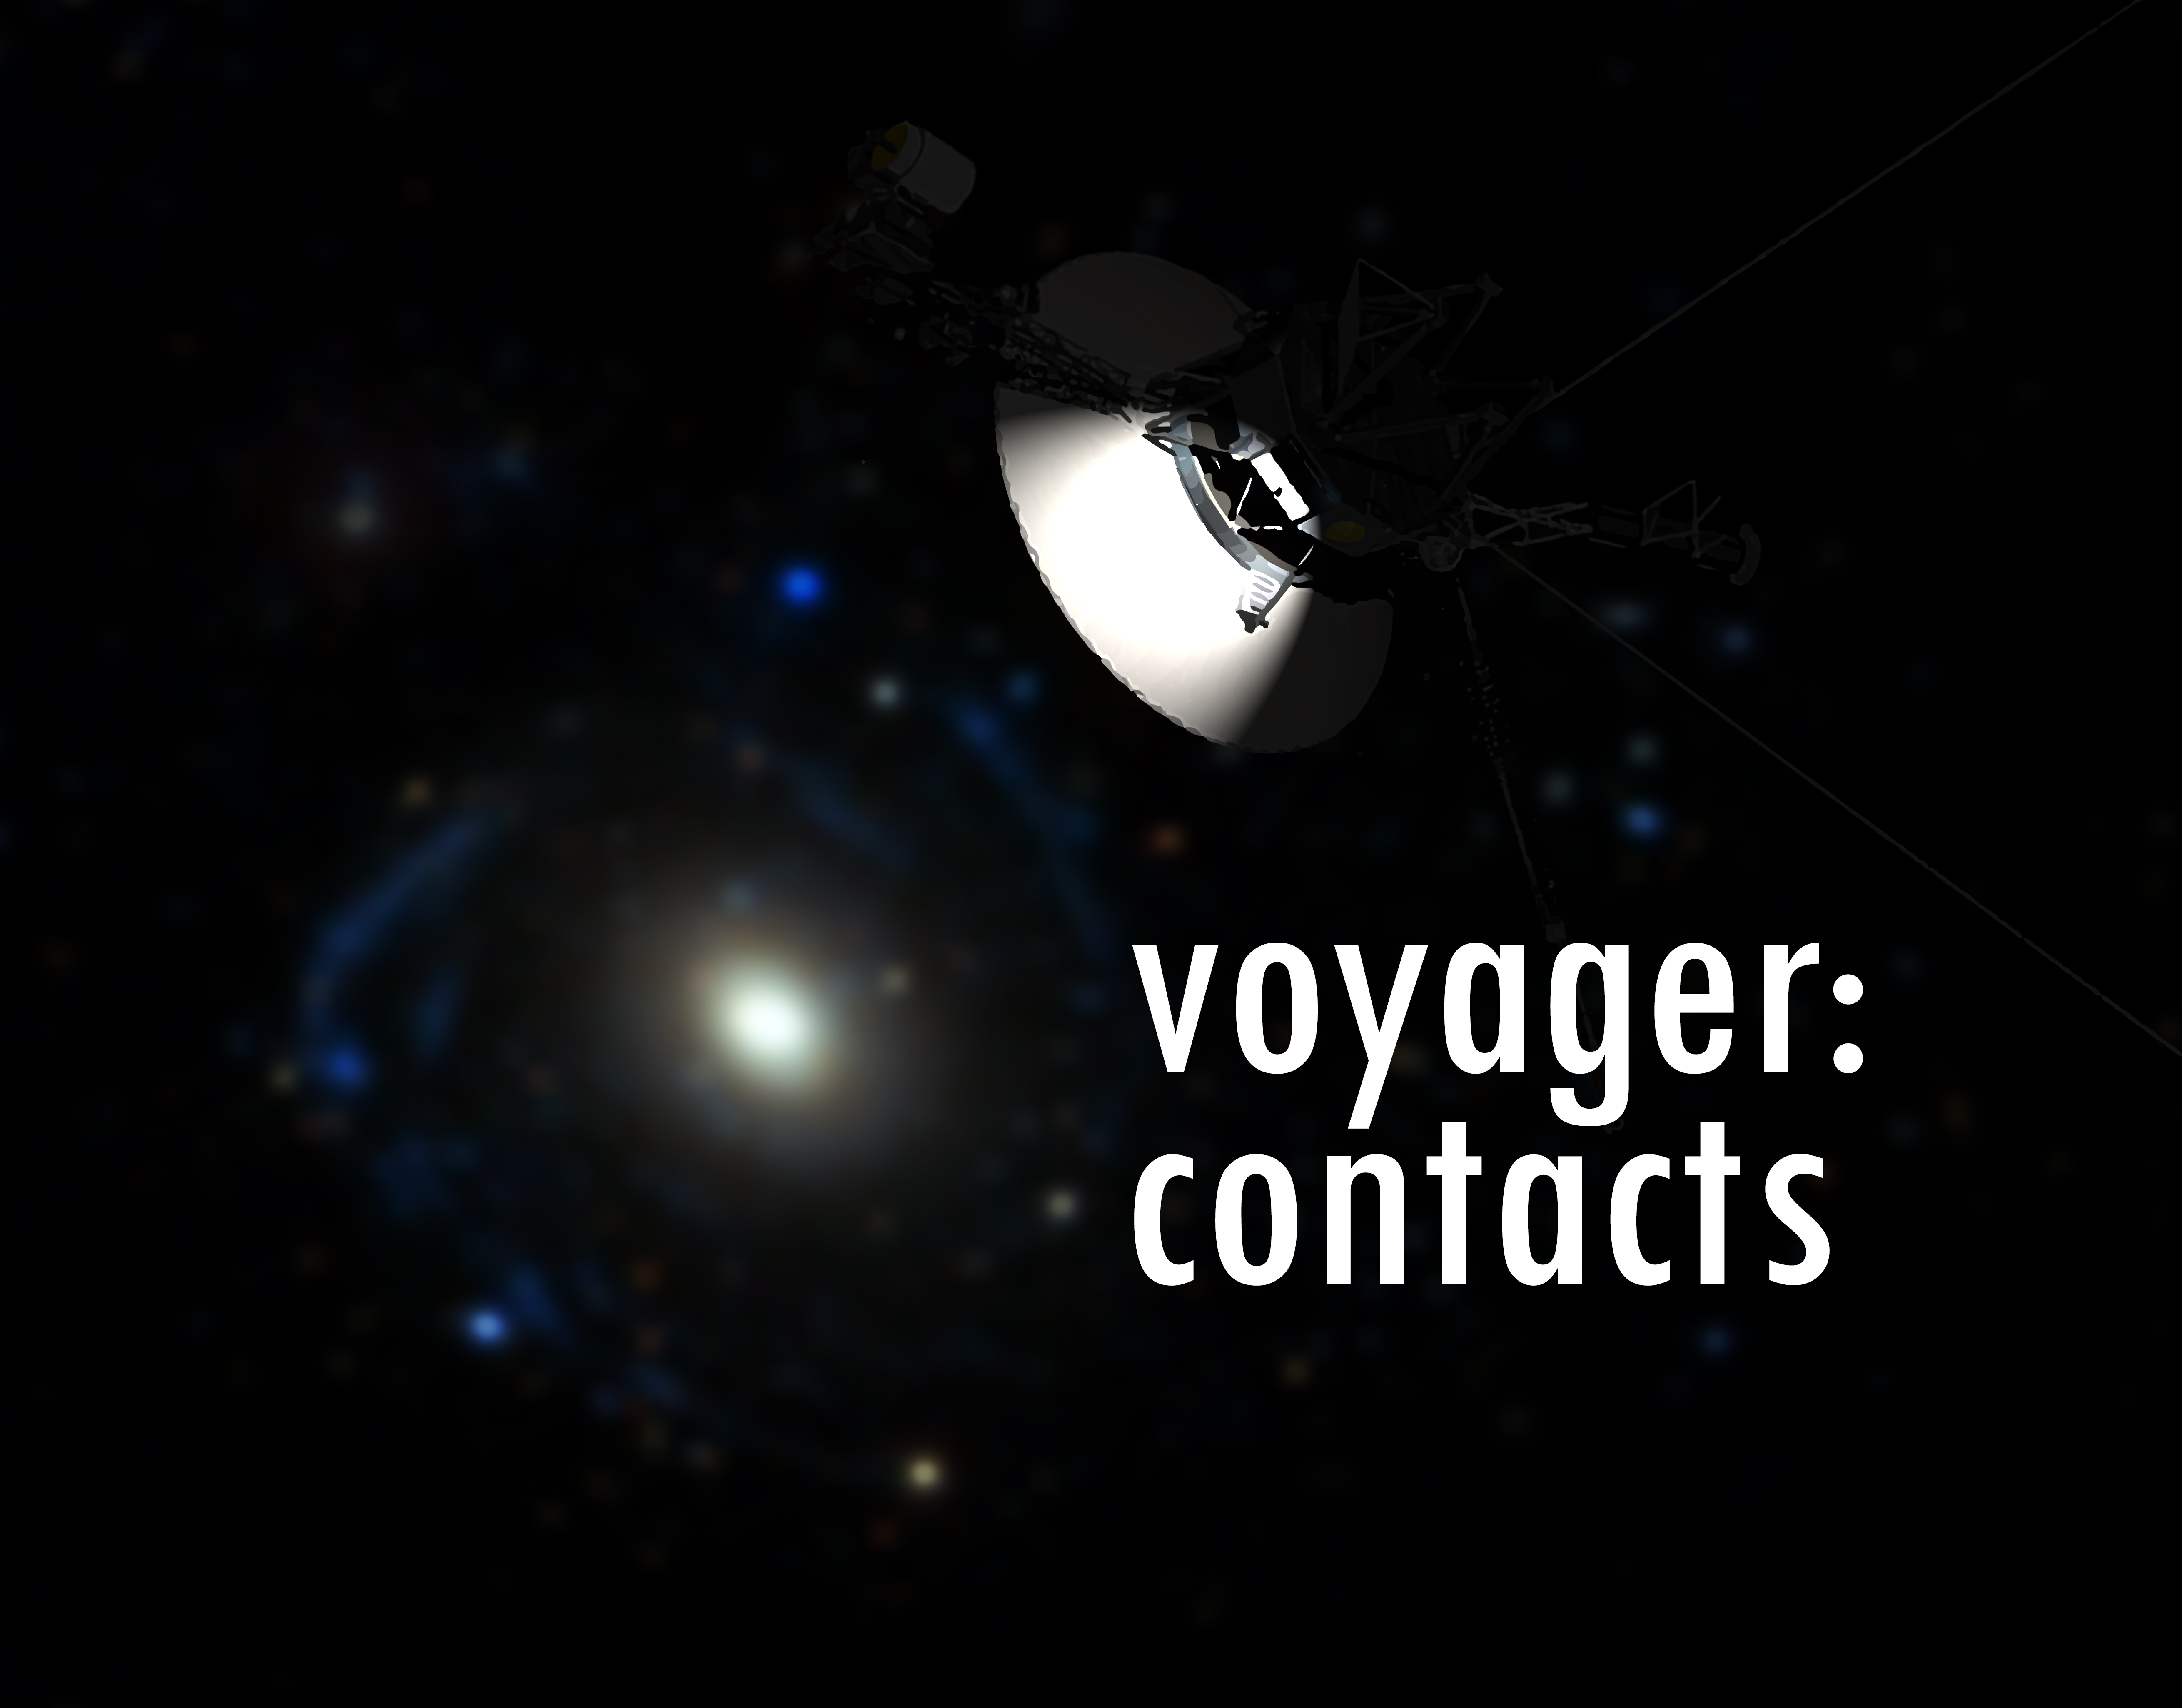 Release: "Voyager: Contacts"